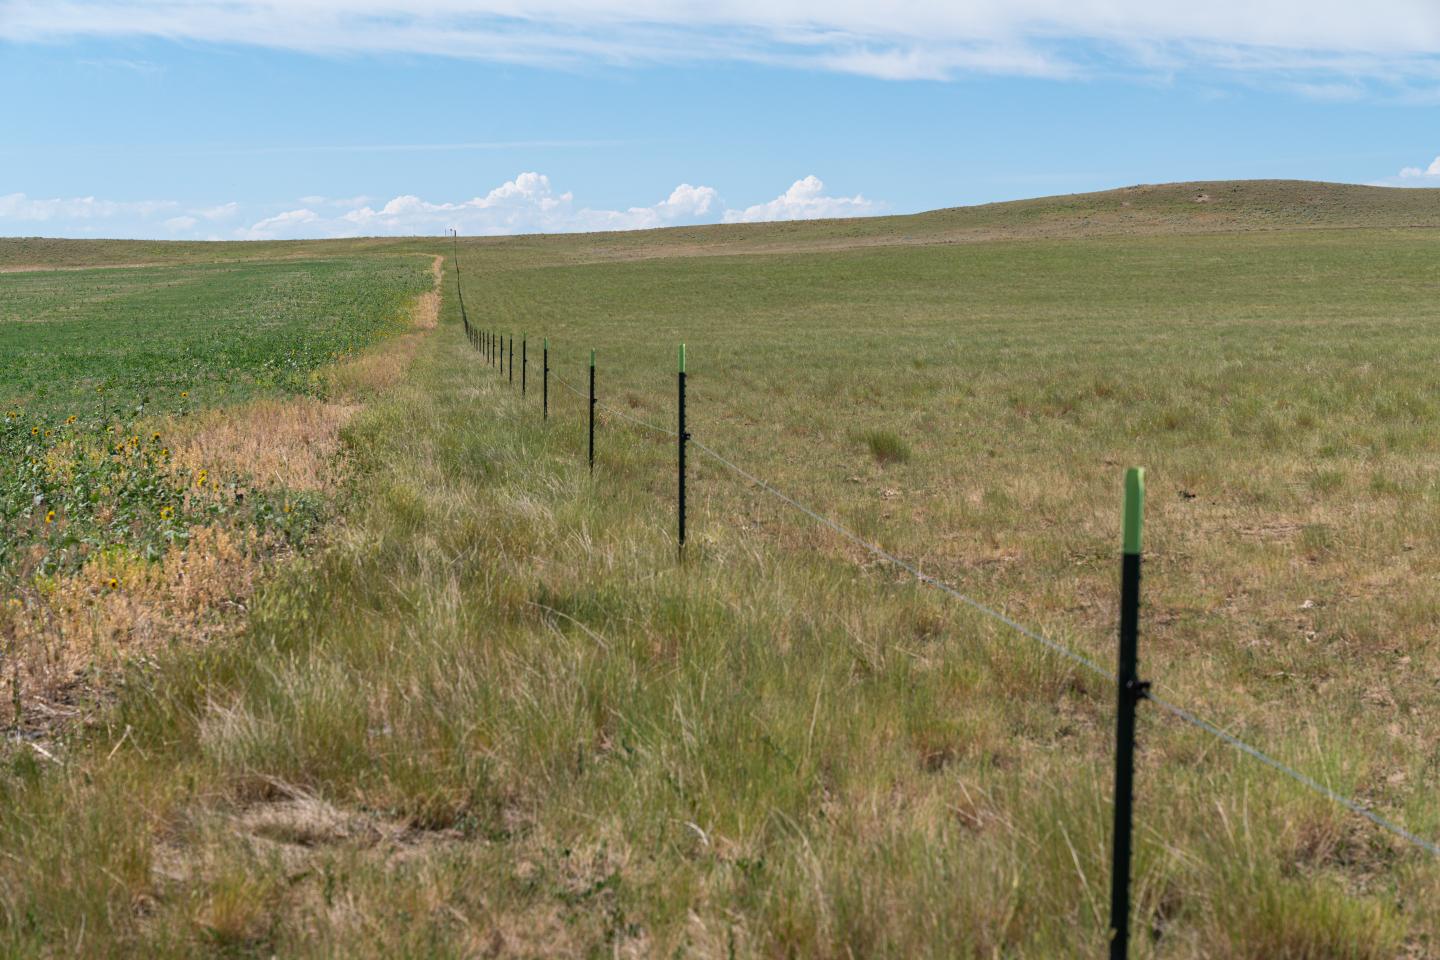 Left side parcel in its third year of monoculture conversion from crested wheatgrass (right side). Stillwater County MT.